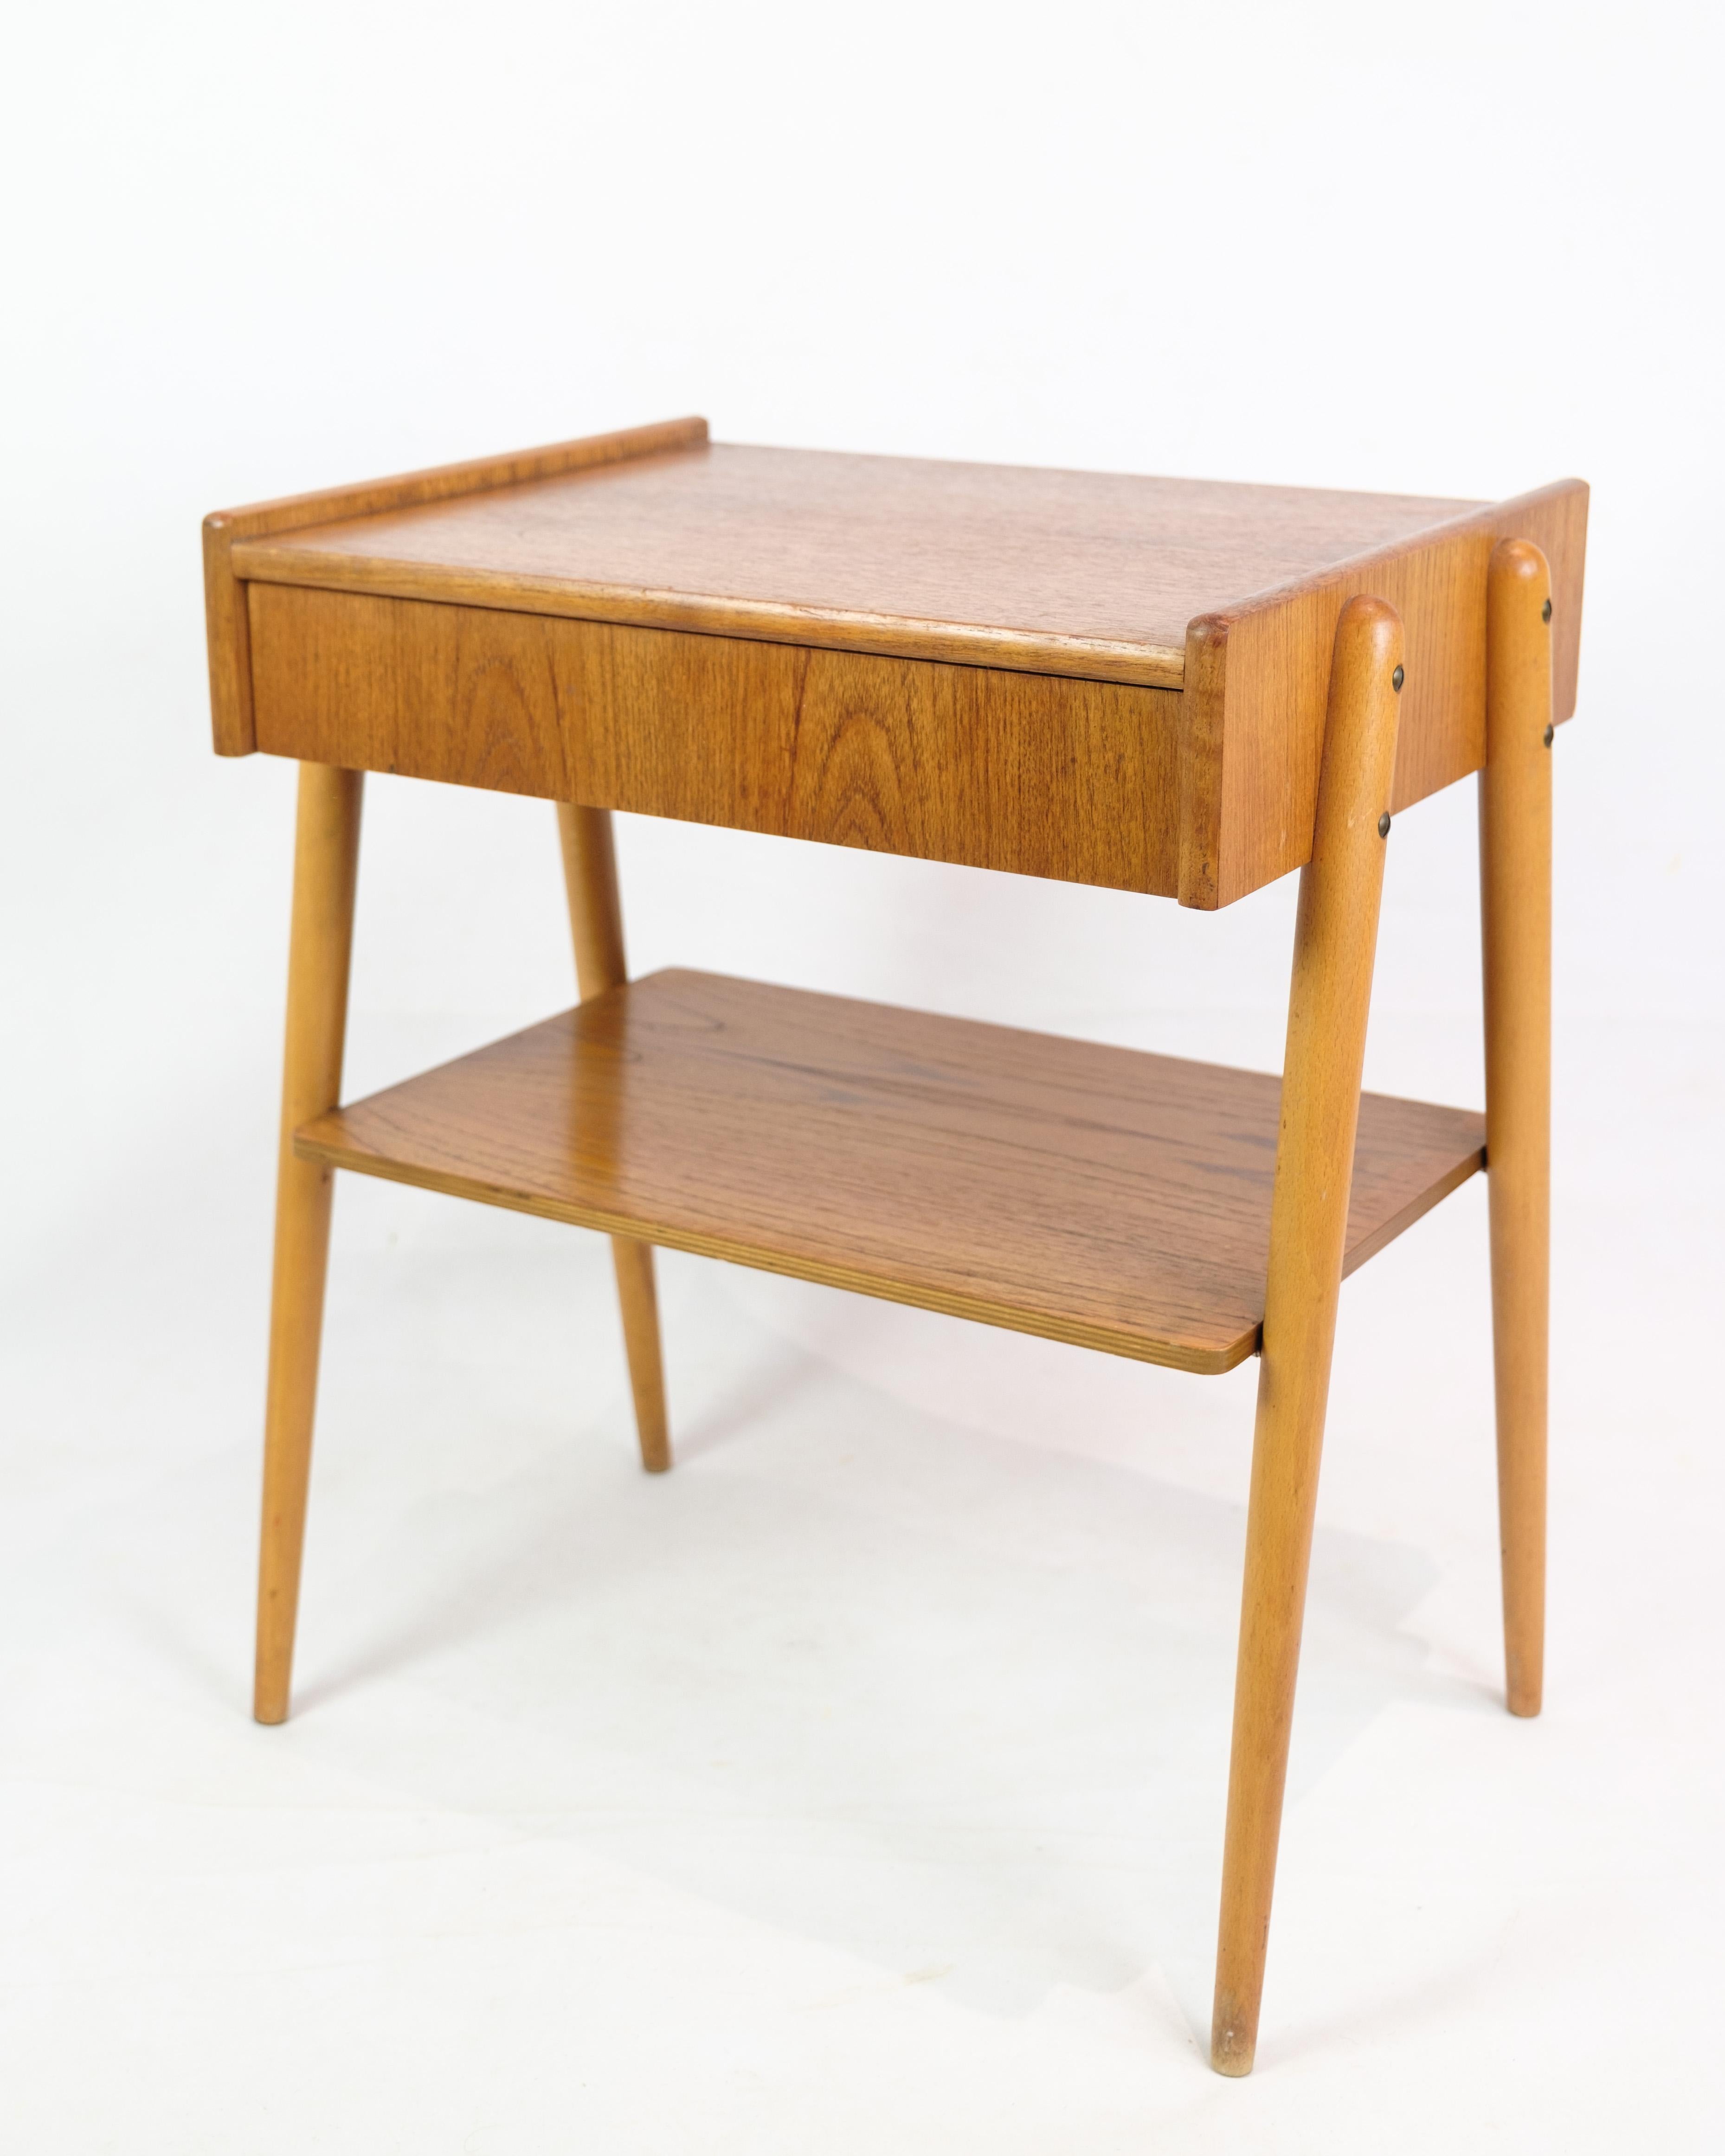 Swedish Set of Nightstands In Teak, By AB Carlström & Co Furniture Factory From 1950s For Sale